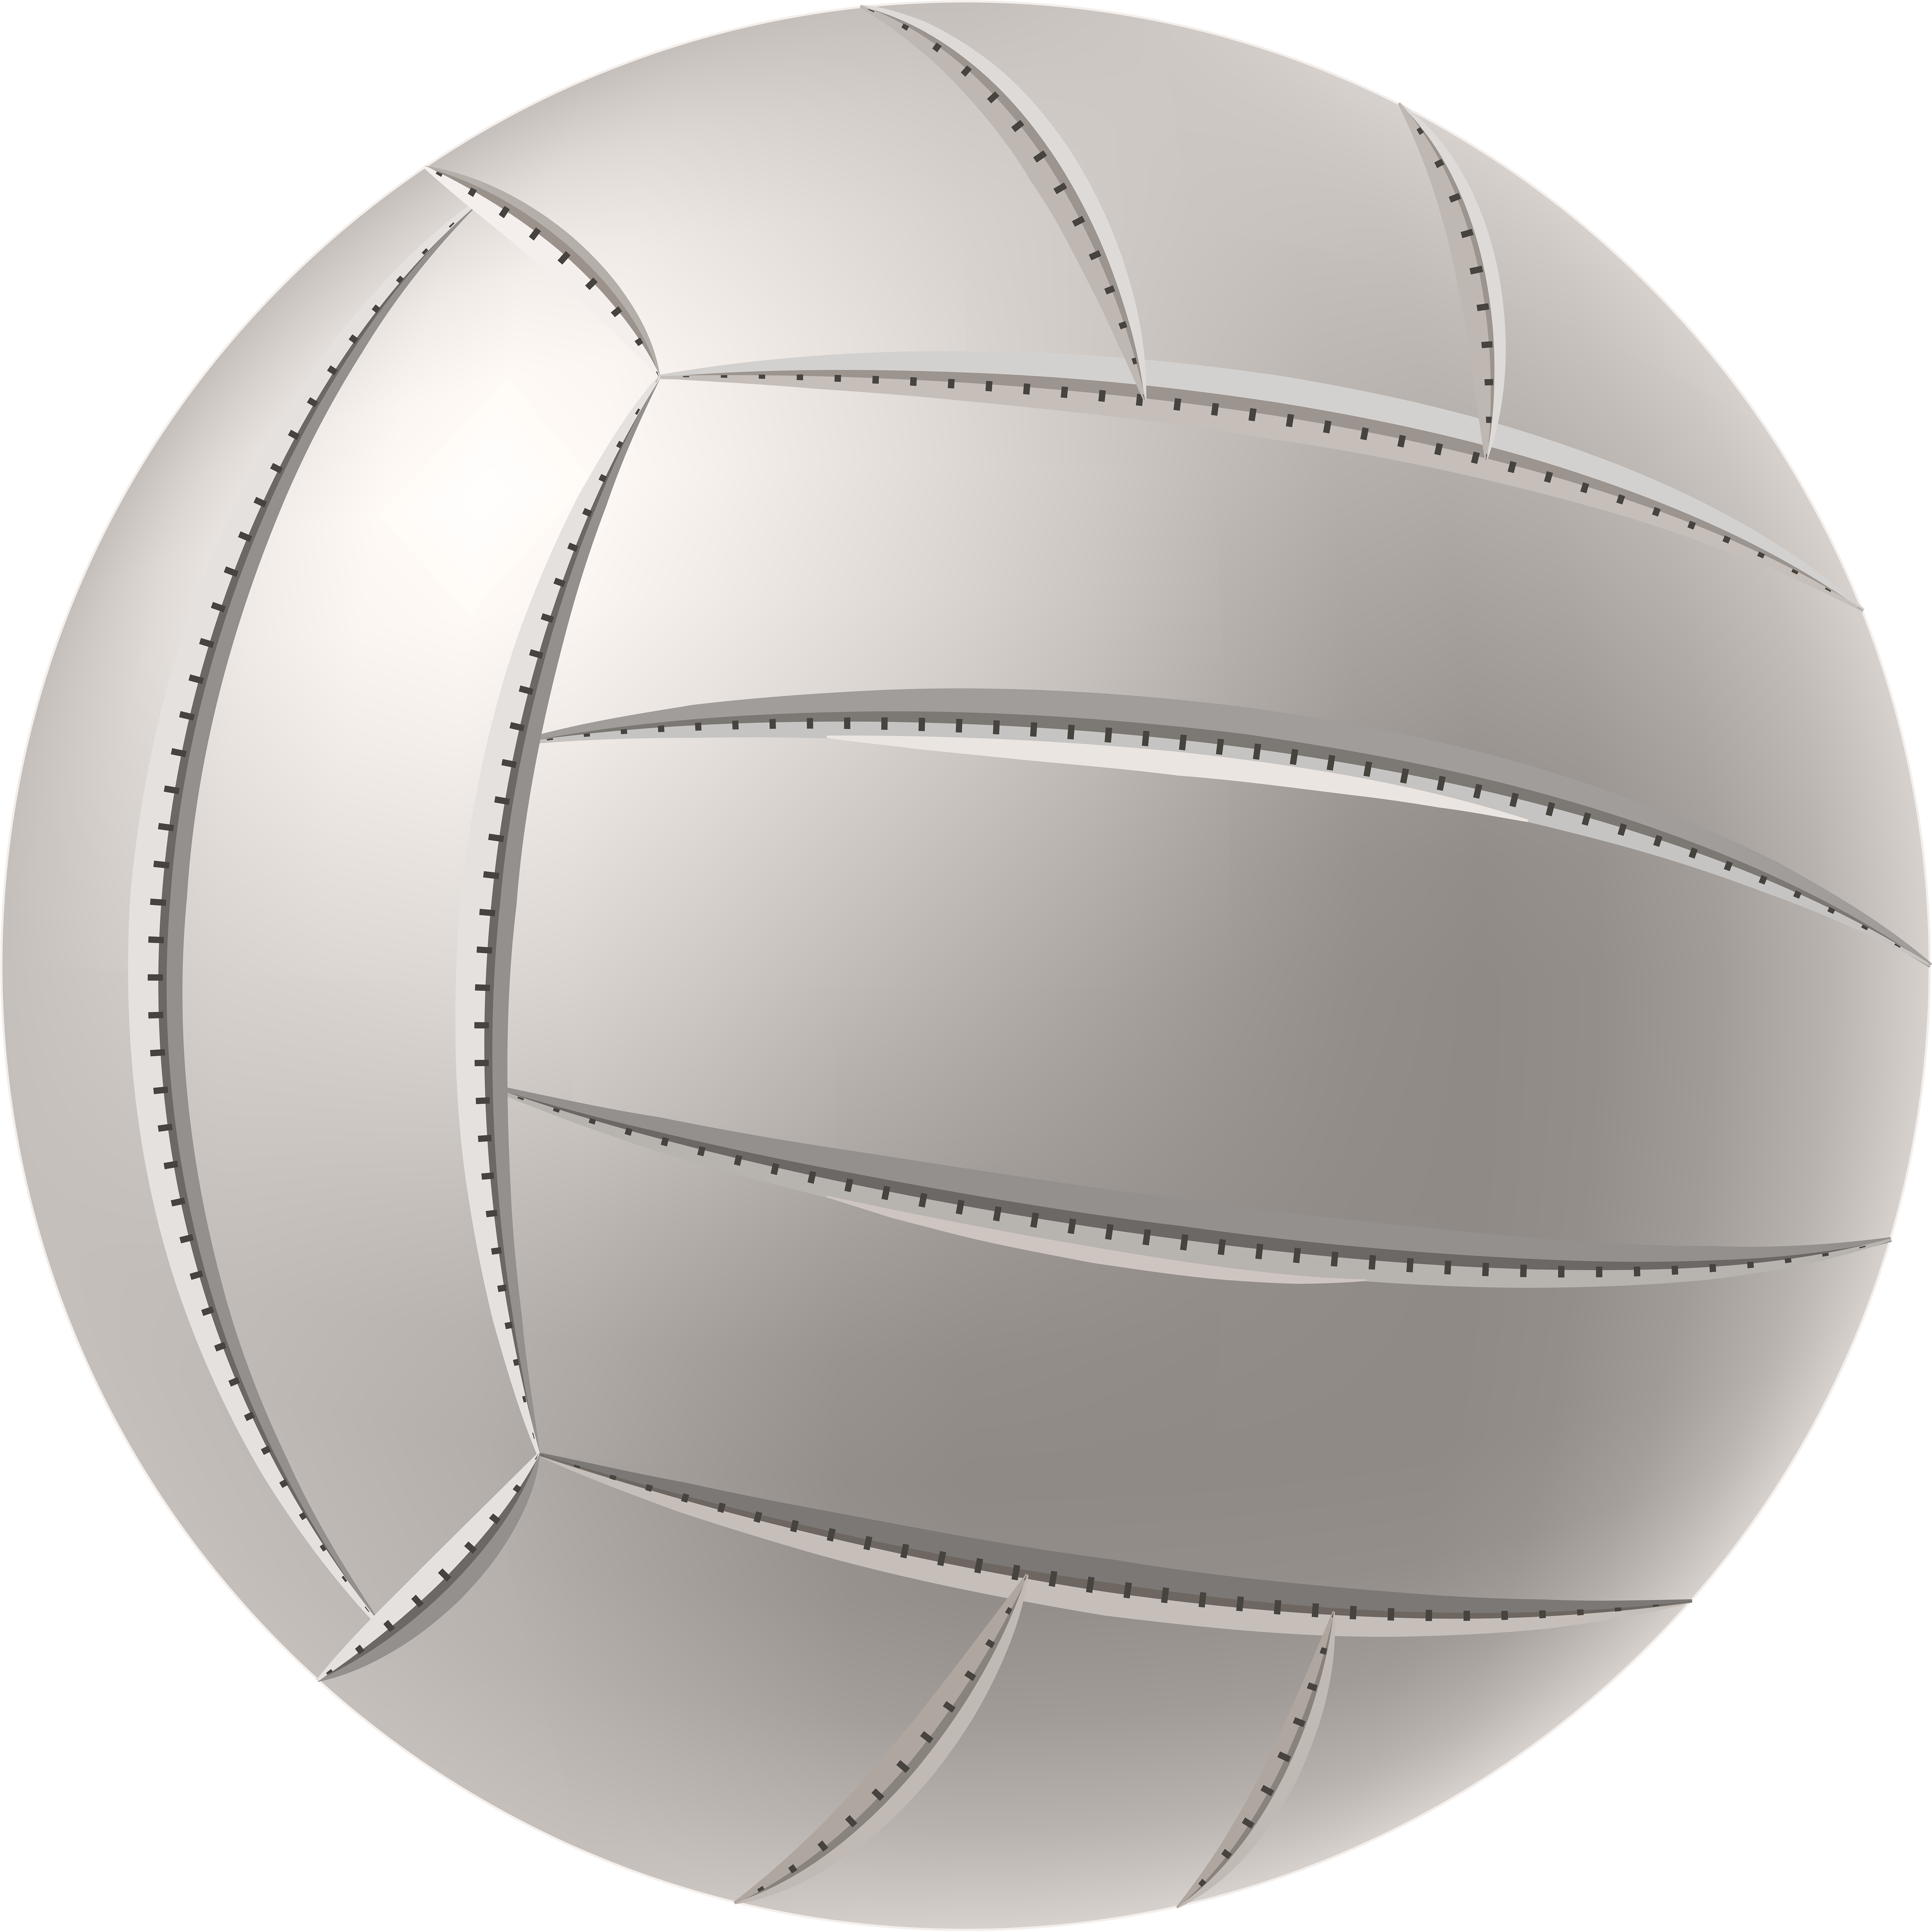 volleyball clipart with no background